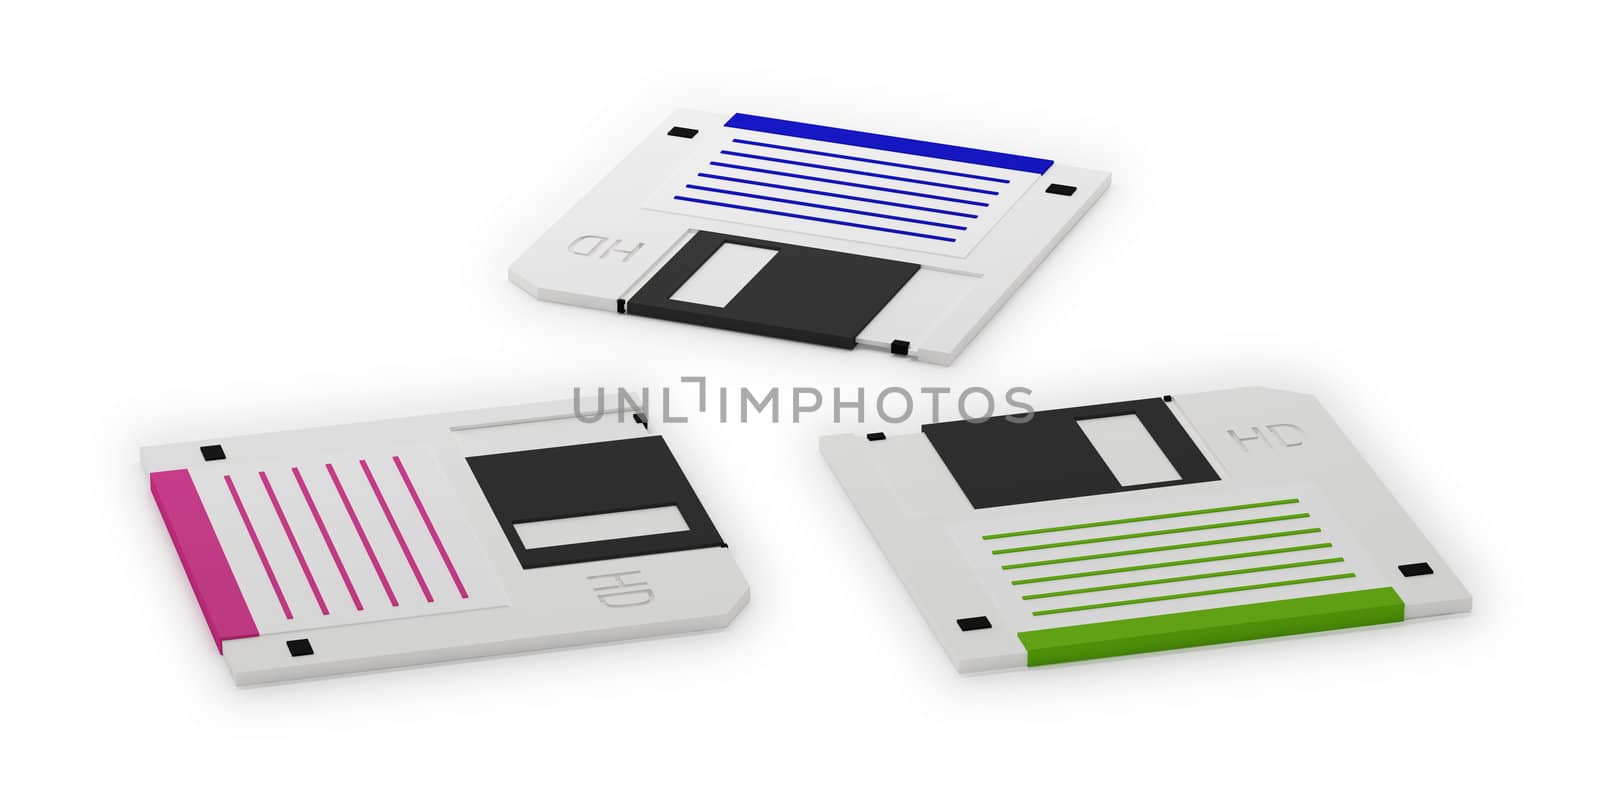 Floppy Diskette. This image contains clipping path for easy background removing.